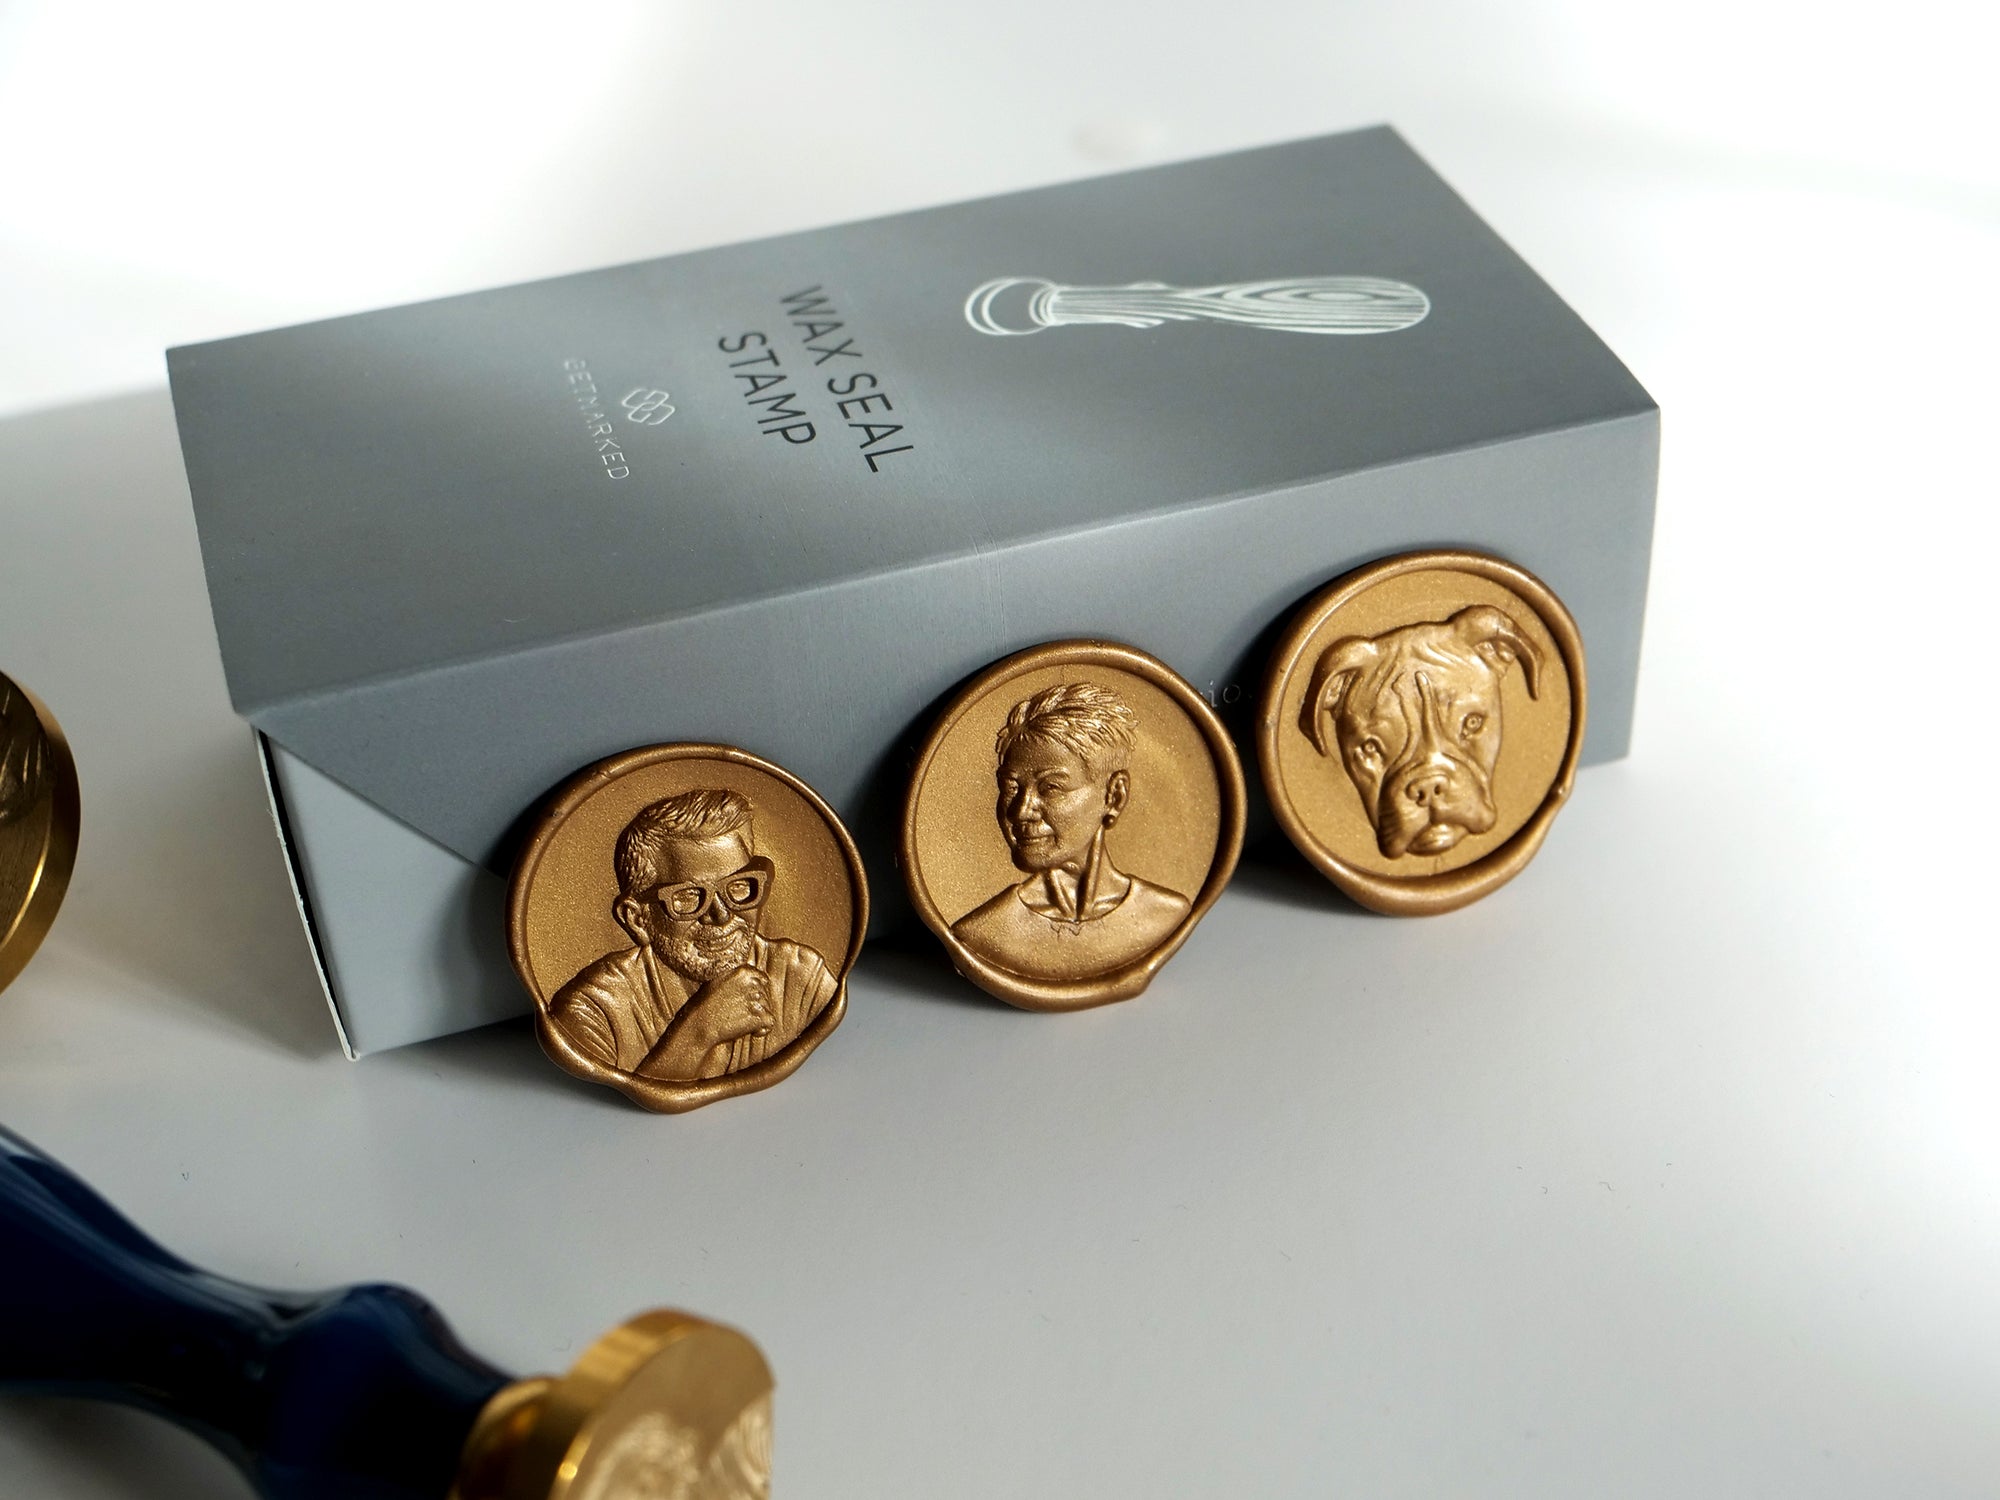 Customized 3D Wax Seals.  High-Definition of details, a perfect gift for weddings, anniversary, birthdays and special occasions.  Premium quality products and professional services.